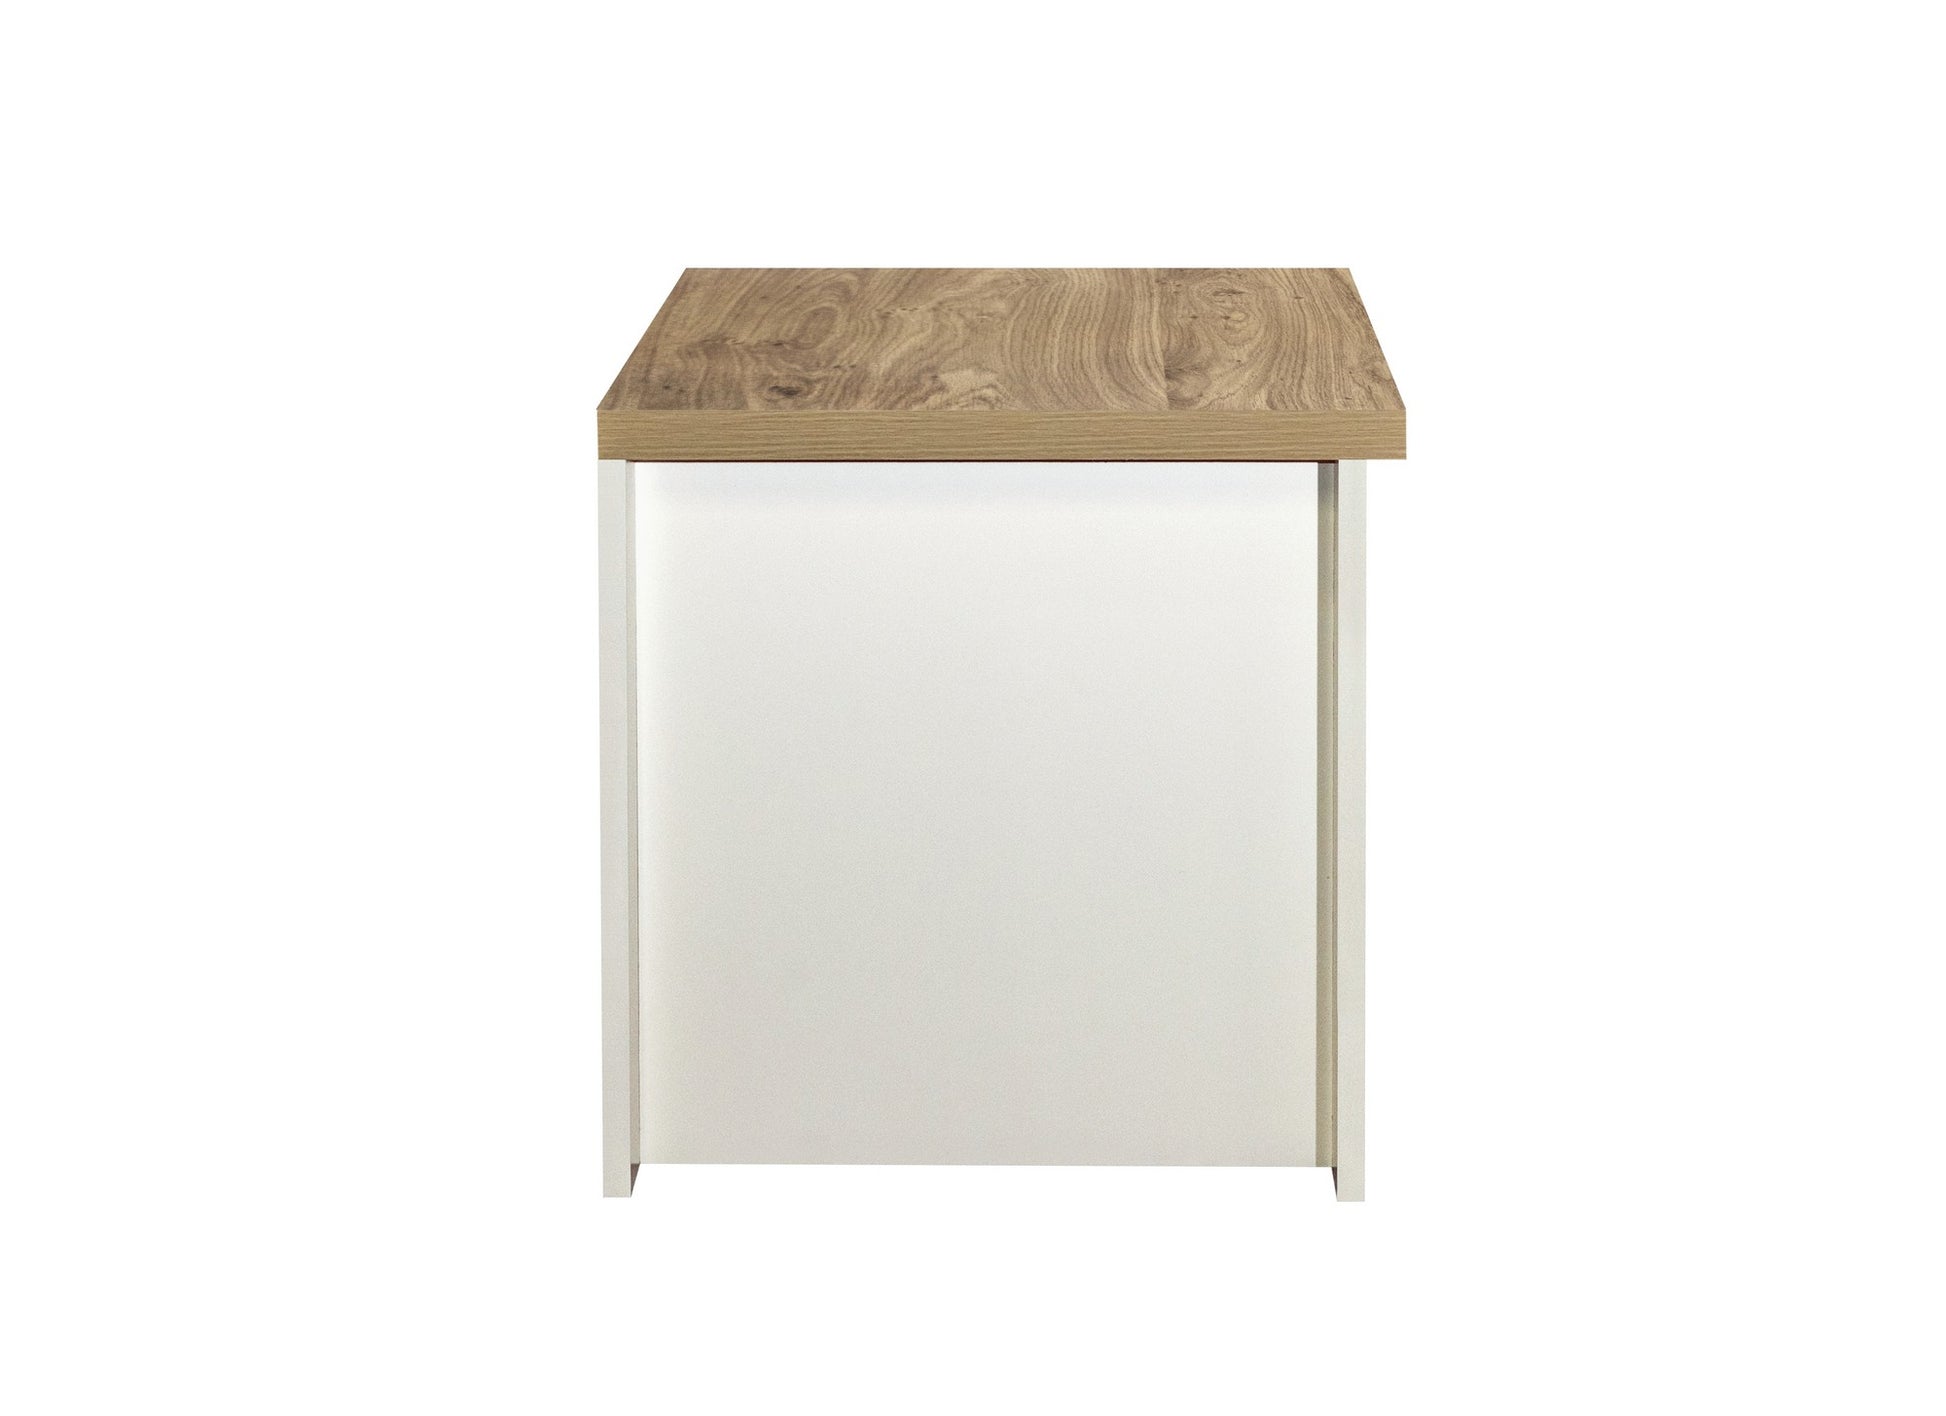 Highgate 1 Drawer Lamp Table with Storage Shelf - Modern Farmhouse Inspired Design with Silver Handle